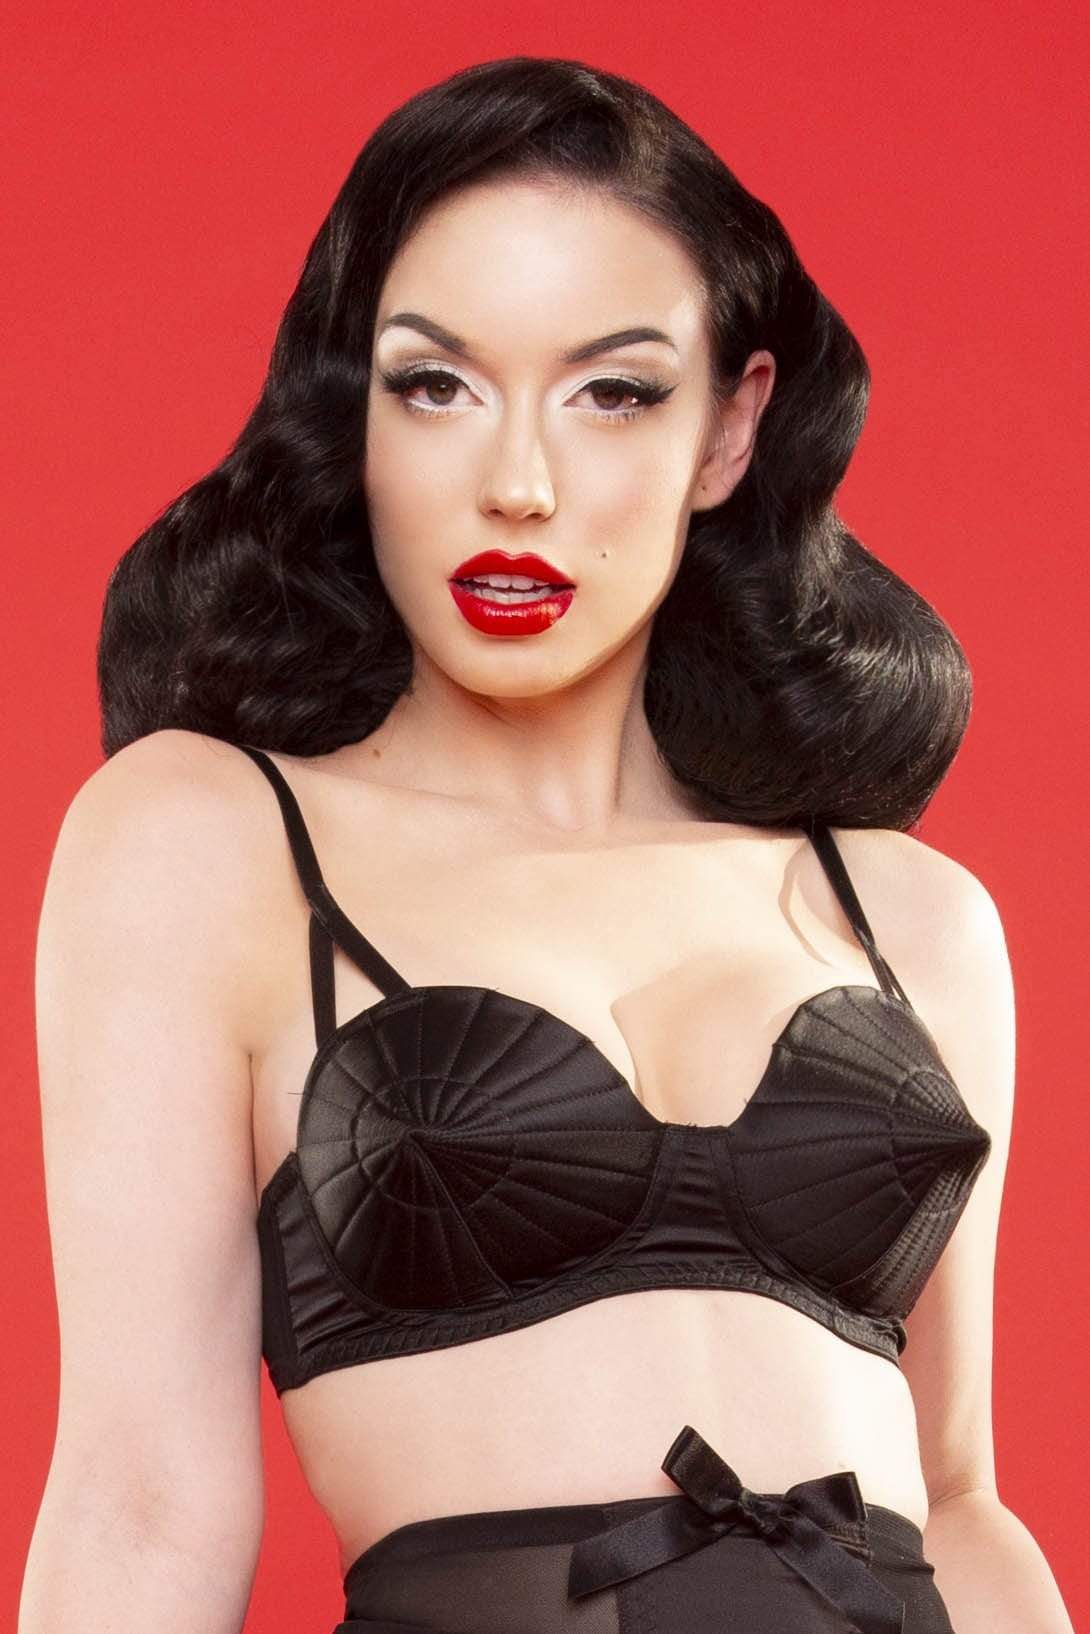 They'll Put Your Eye Out - The Iconic Bullet Bra — Playful